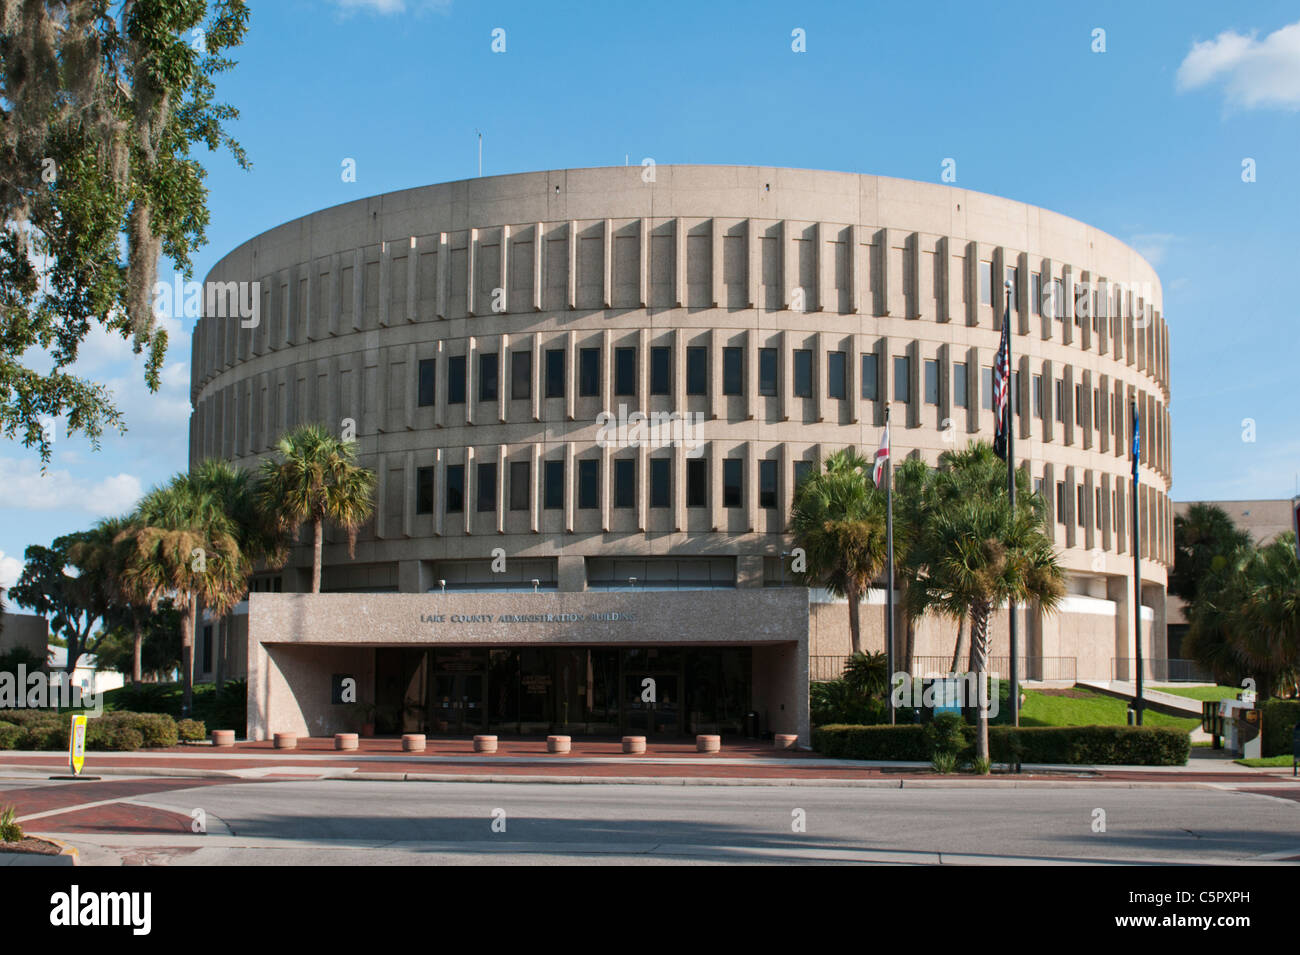 Lake County Administration Building on West Main St. located in Tavares, Lake county Florida USA Stock Photo